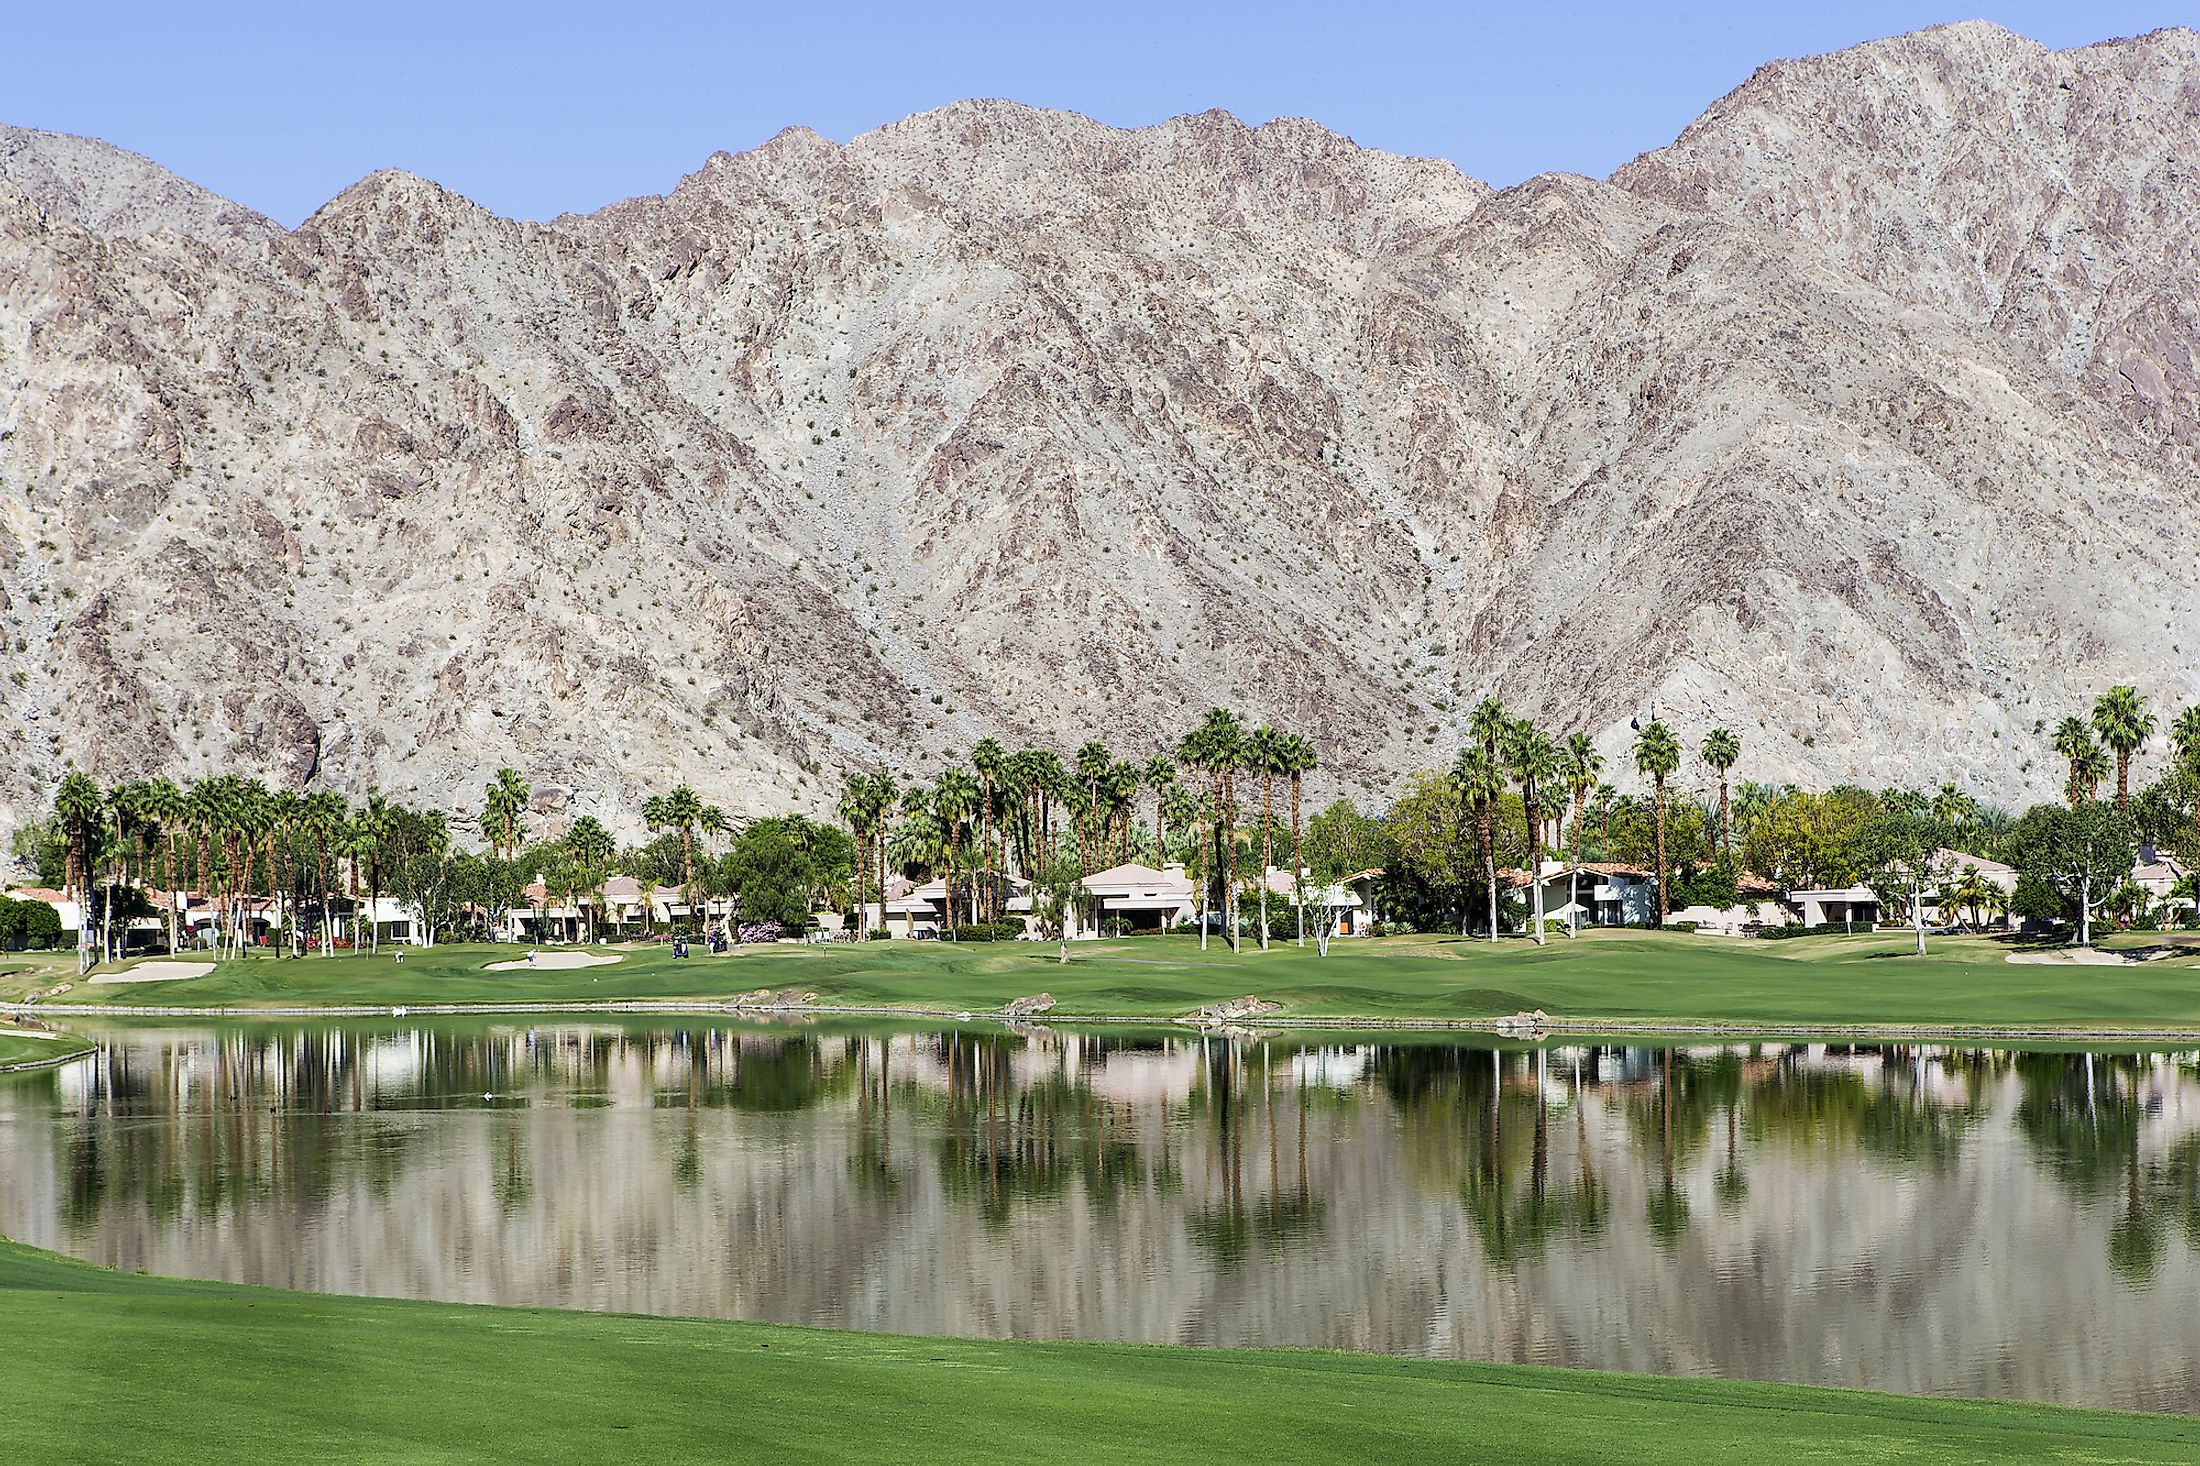 The golf course in Rancho Mirage. Editorial credit: Isogood_patrick / Shutterstock.com